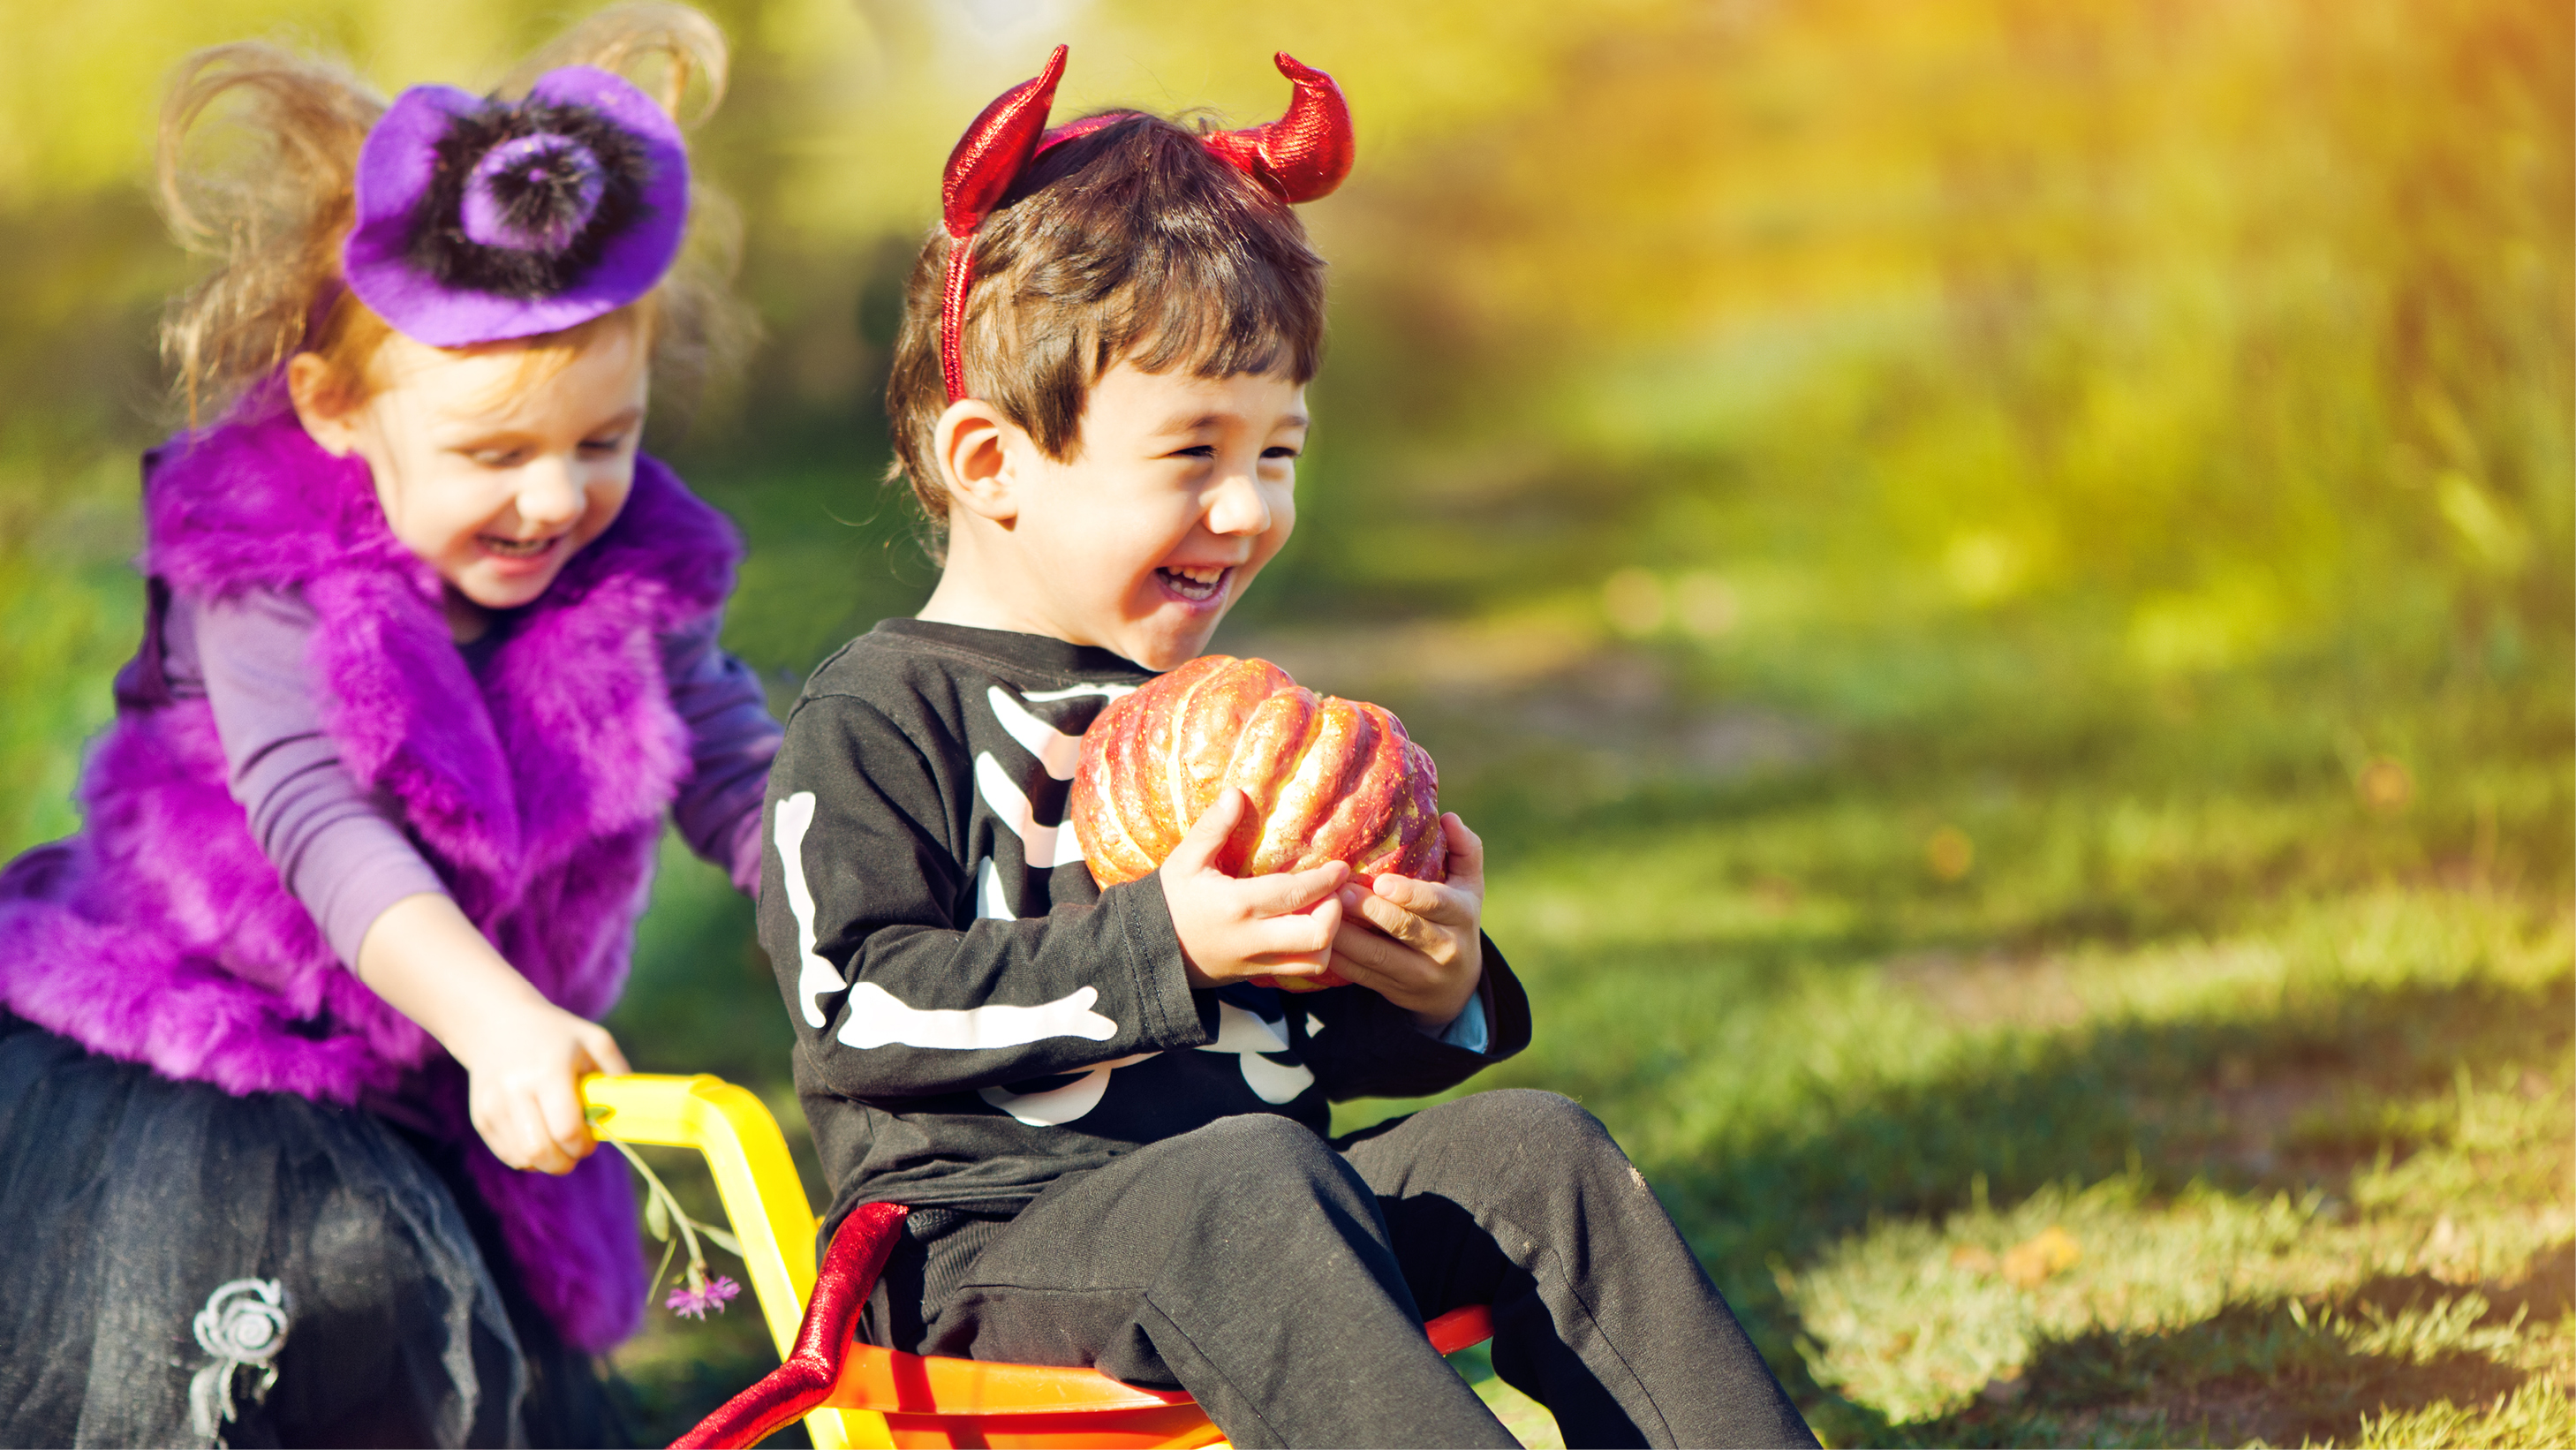 Two kids dressed up in costumes playing and holding a pumpkin